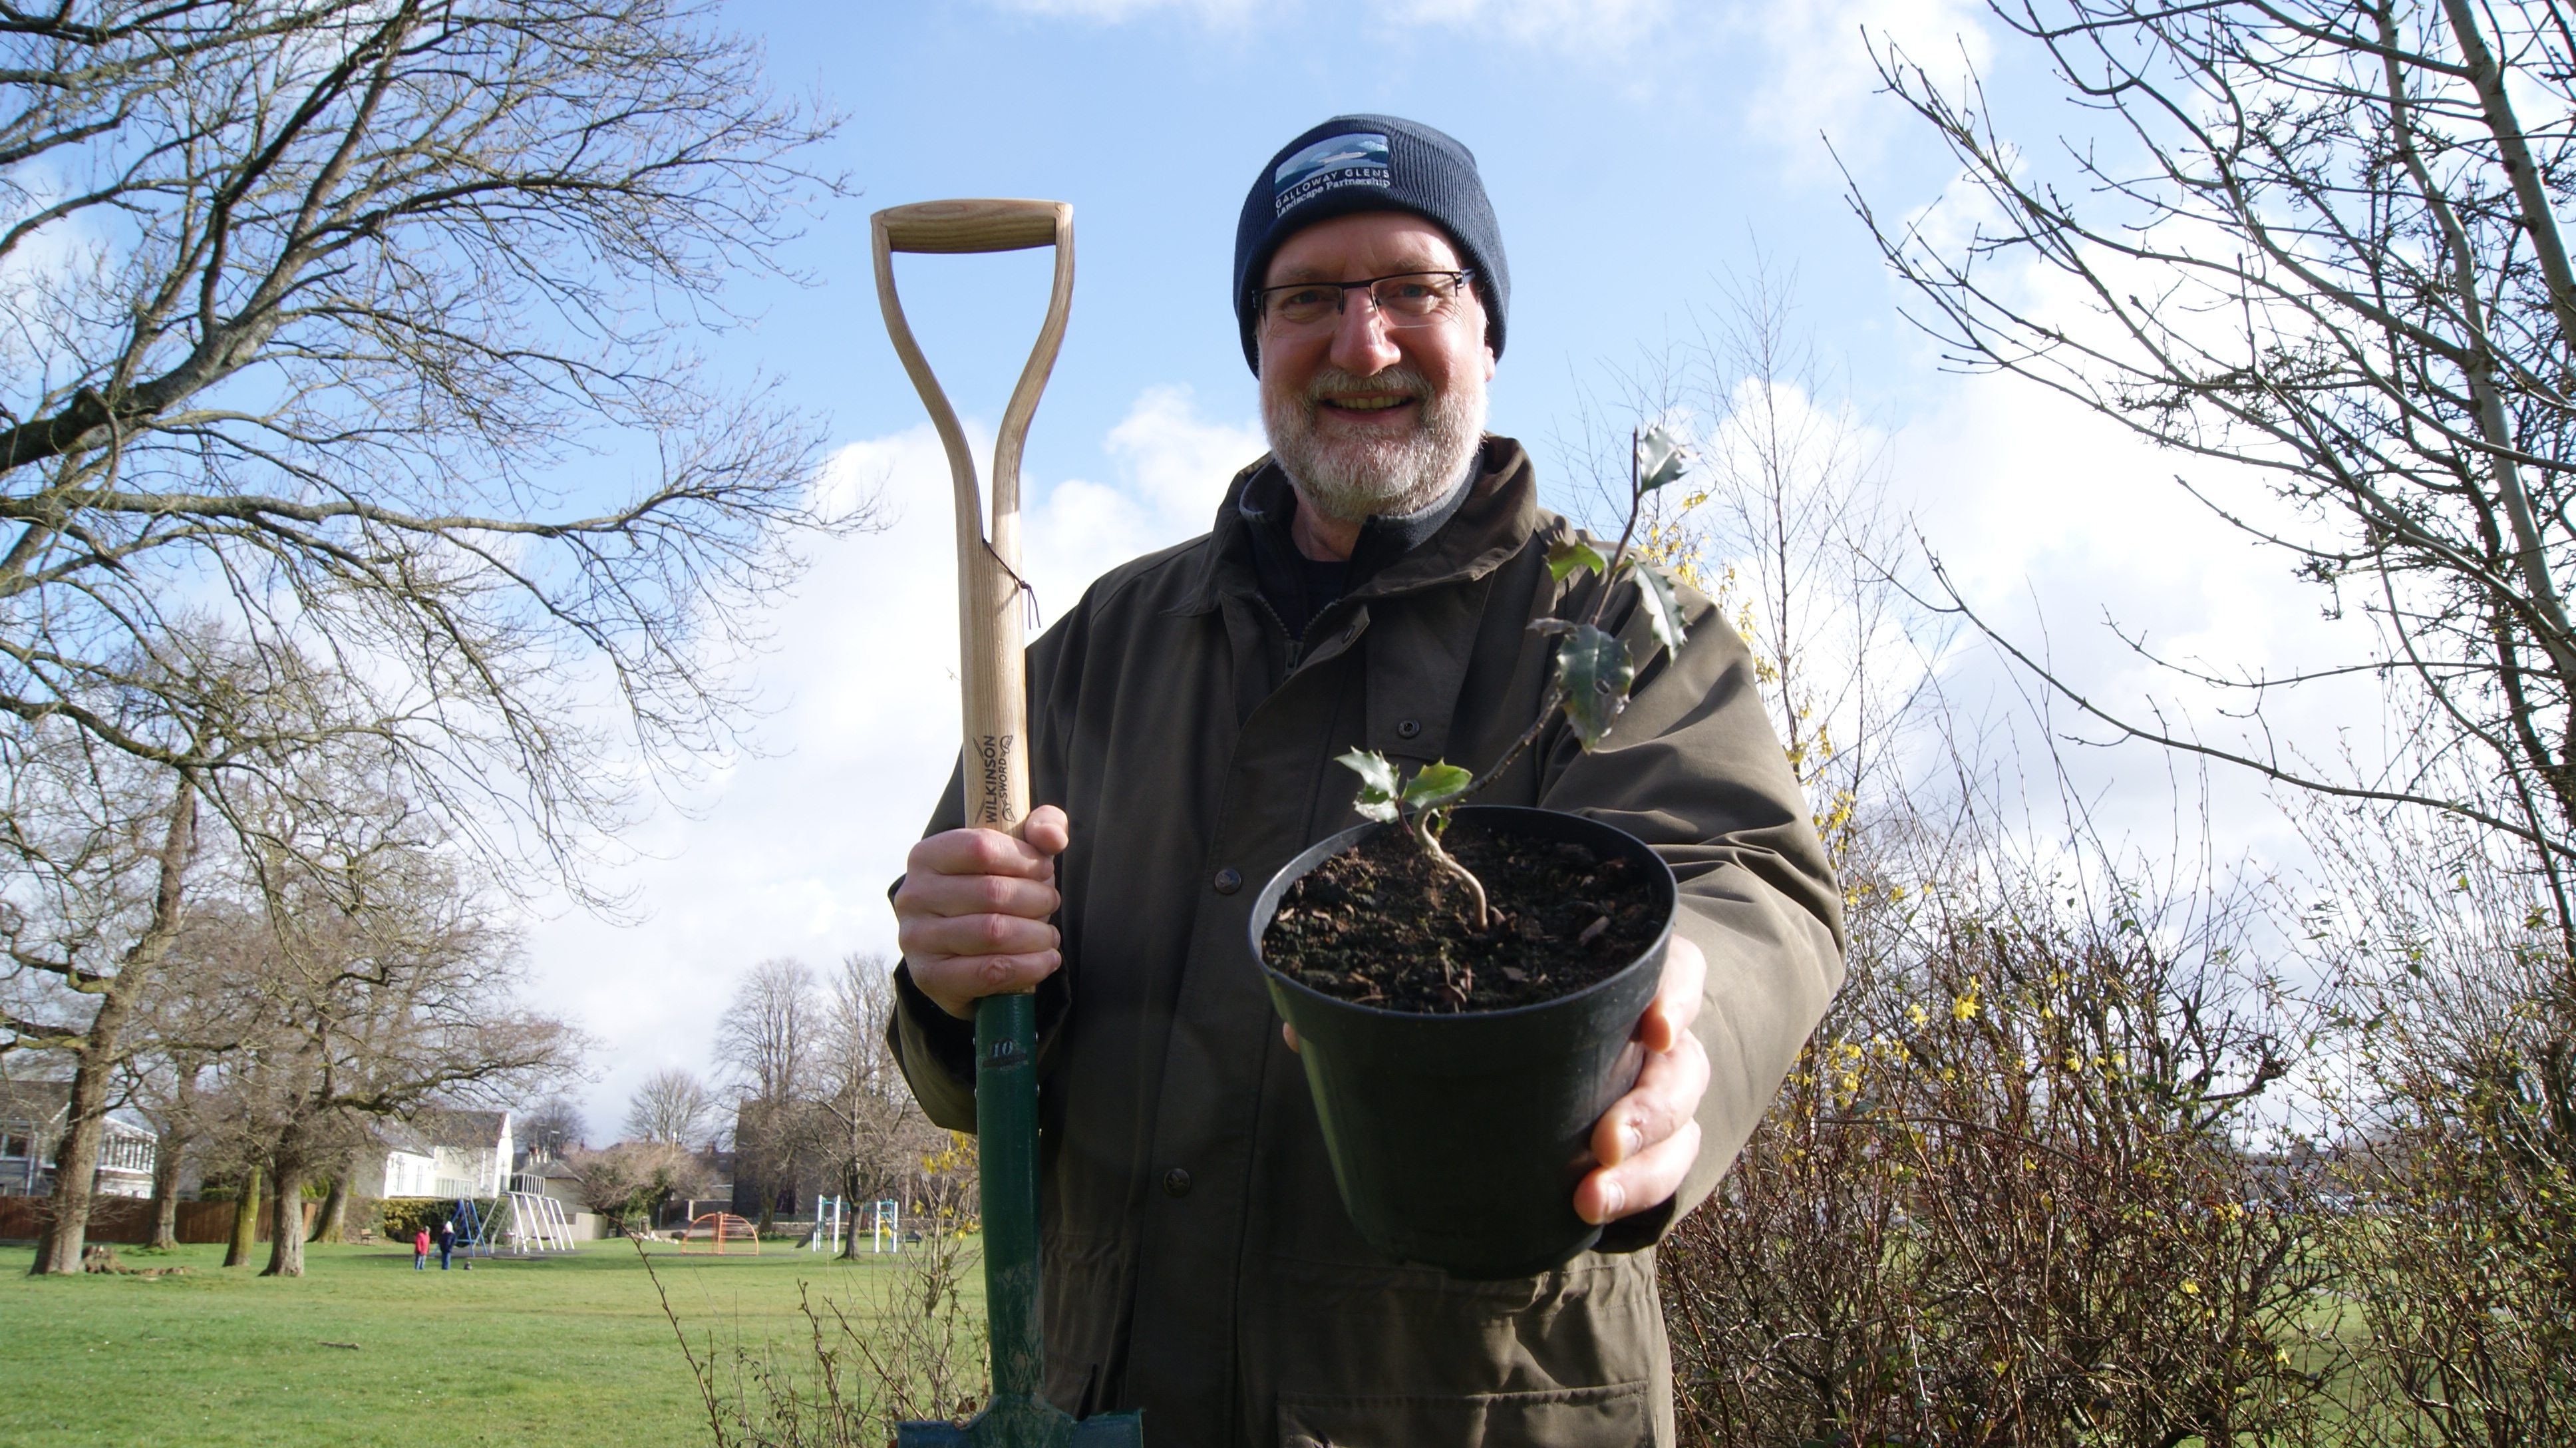 Applications invited to help plant more trees in south Scotland